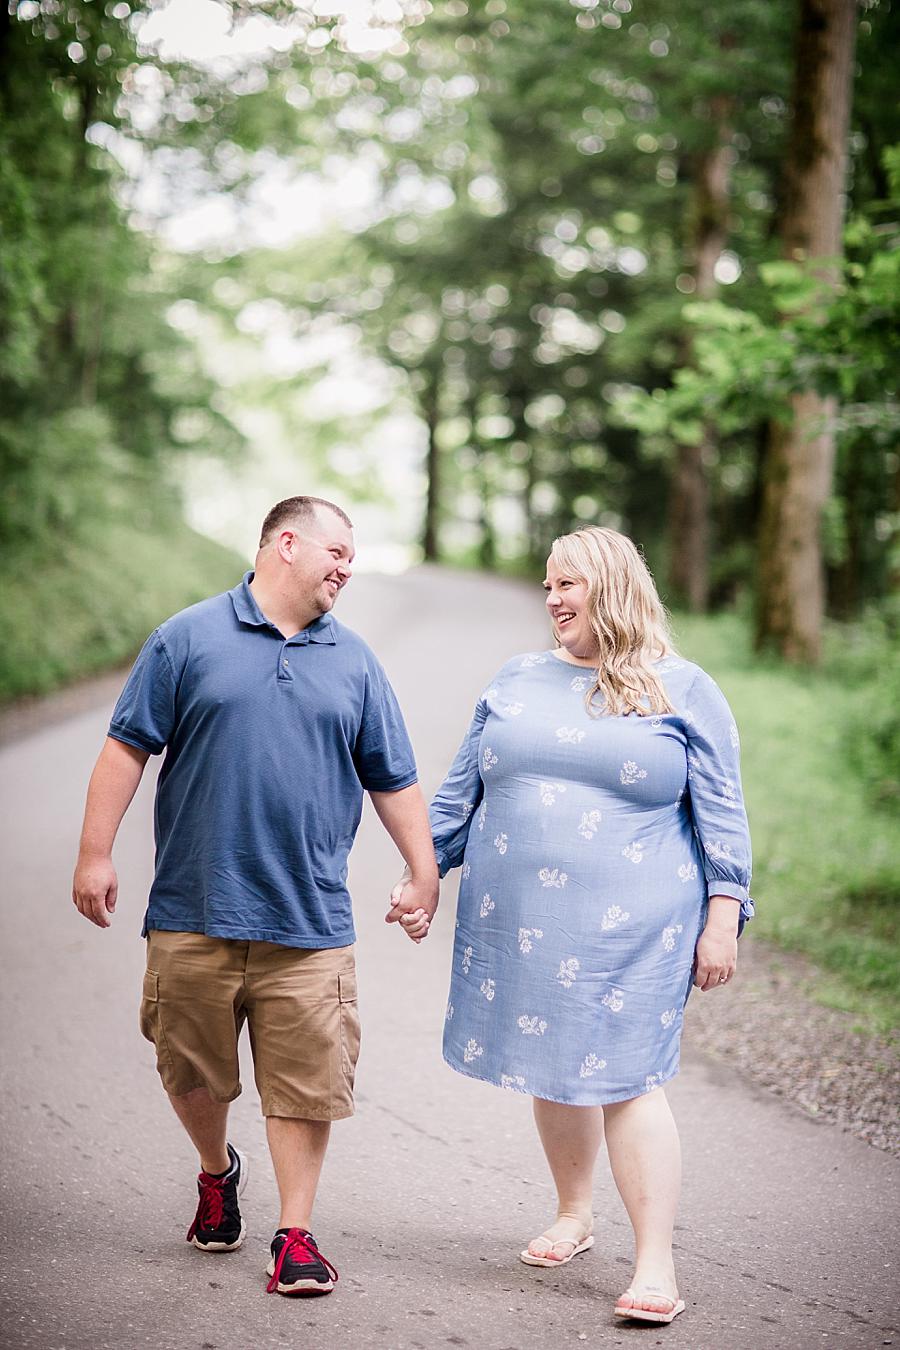 Holding hands at this Cades Cove Engagement by Knoxville Wedding Photographer, Amanda May Photos.